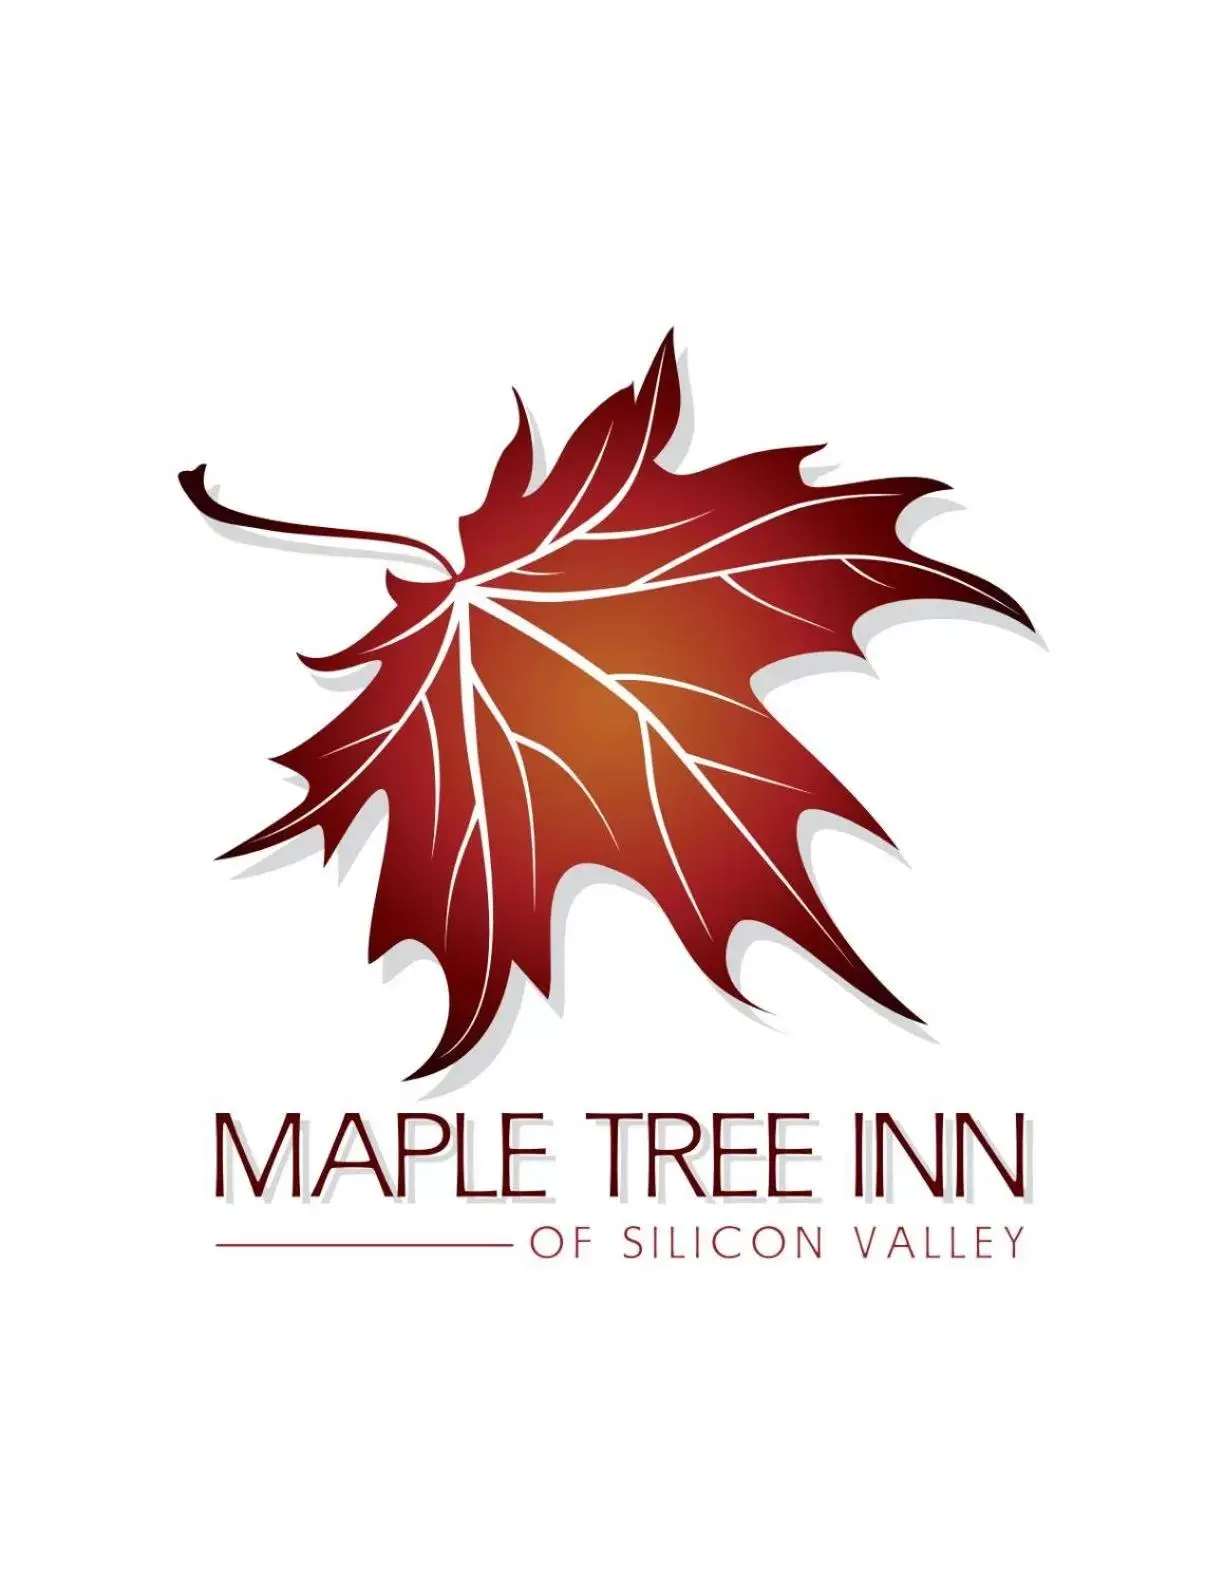 Property logo or sign in Maple Tree Inn